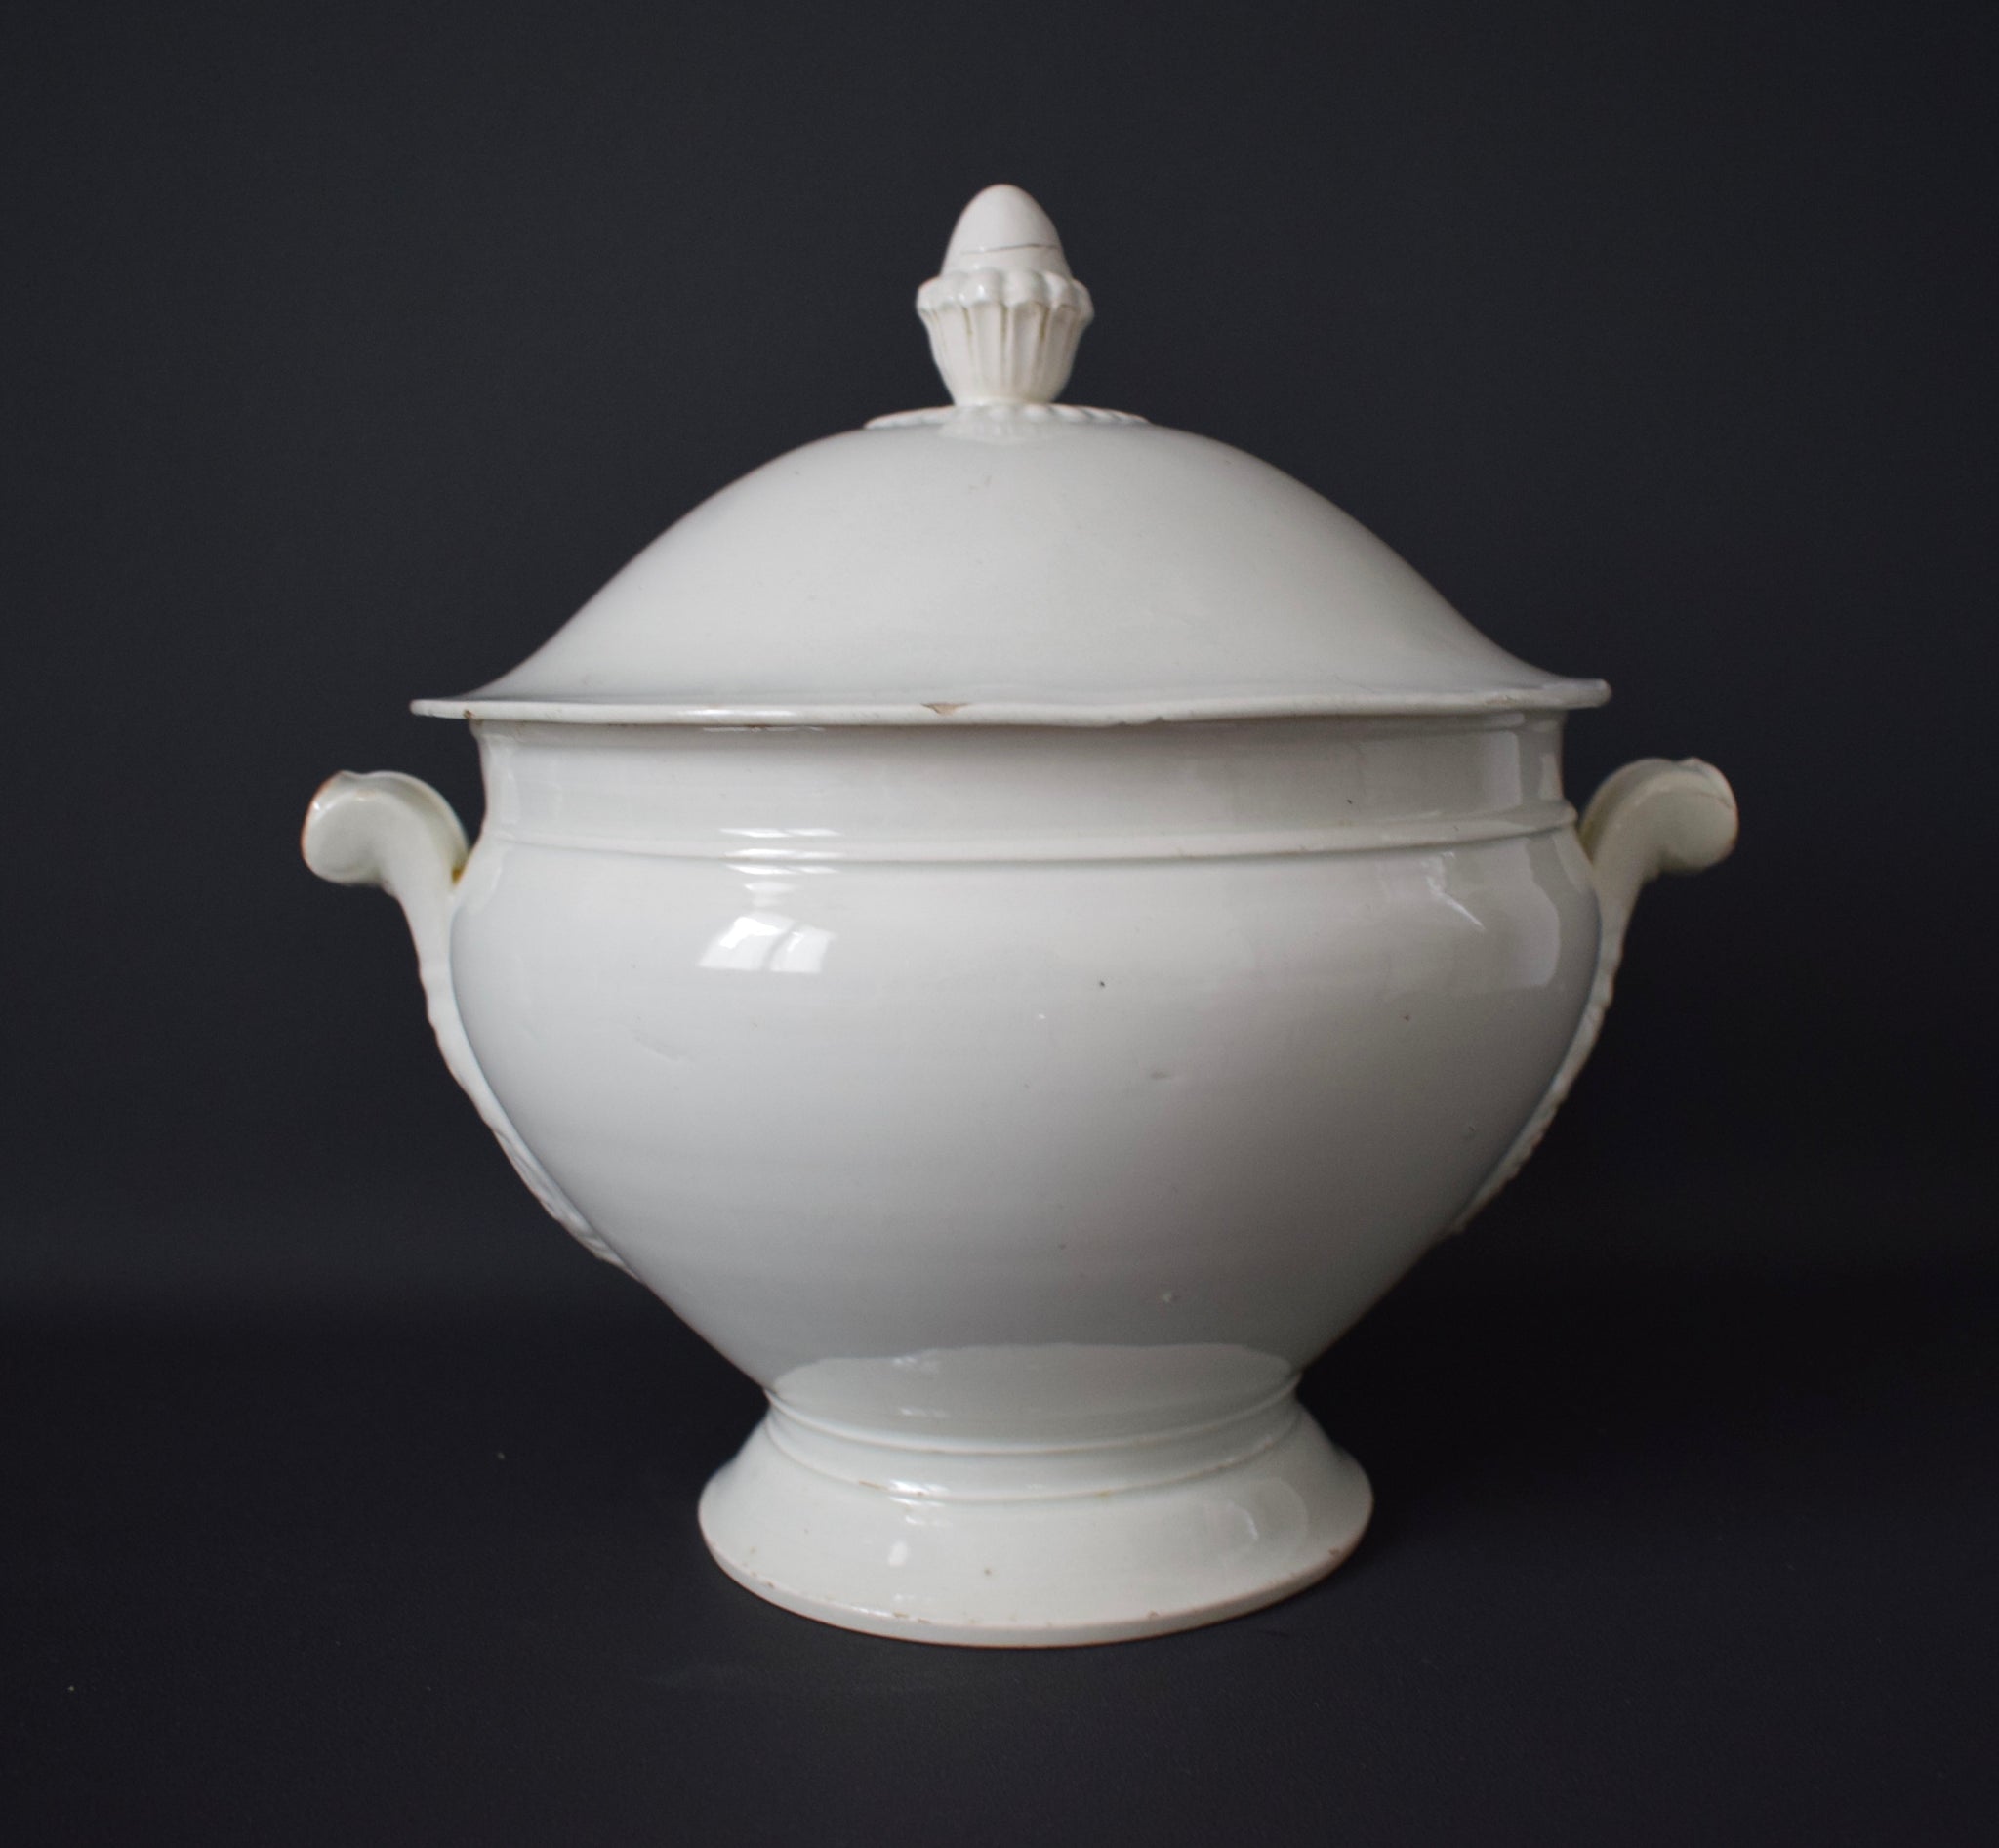 French Antique Shabby Chic Covered Serving Tureen - White Ironstone Tureen